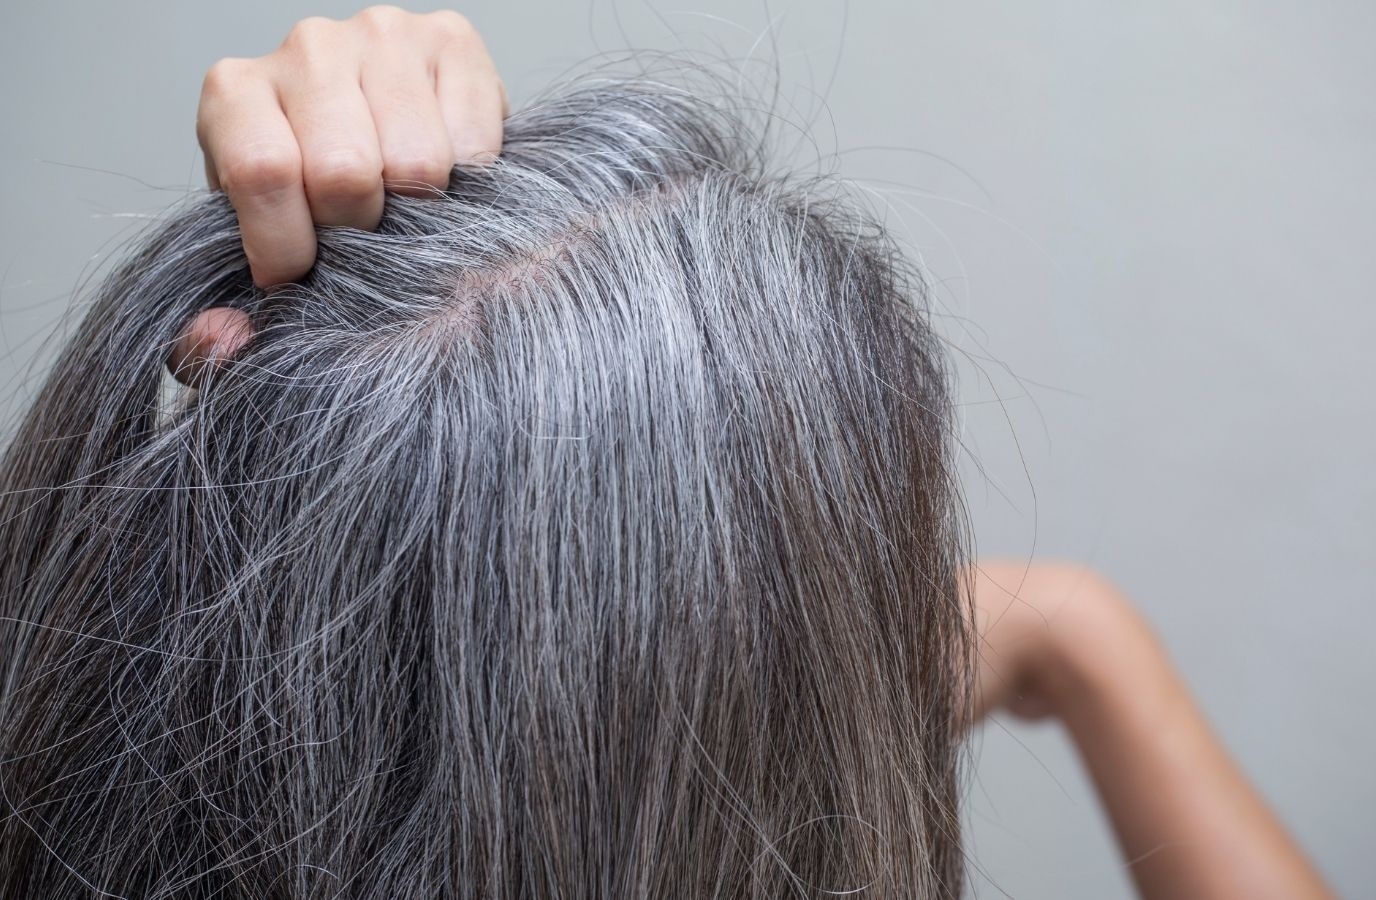 6 simple meals to prevent grey hair